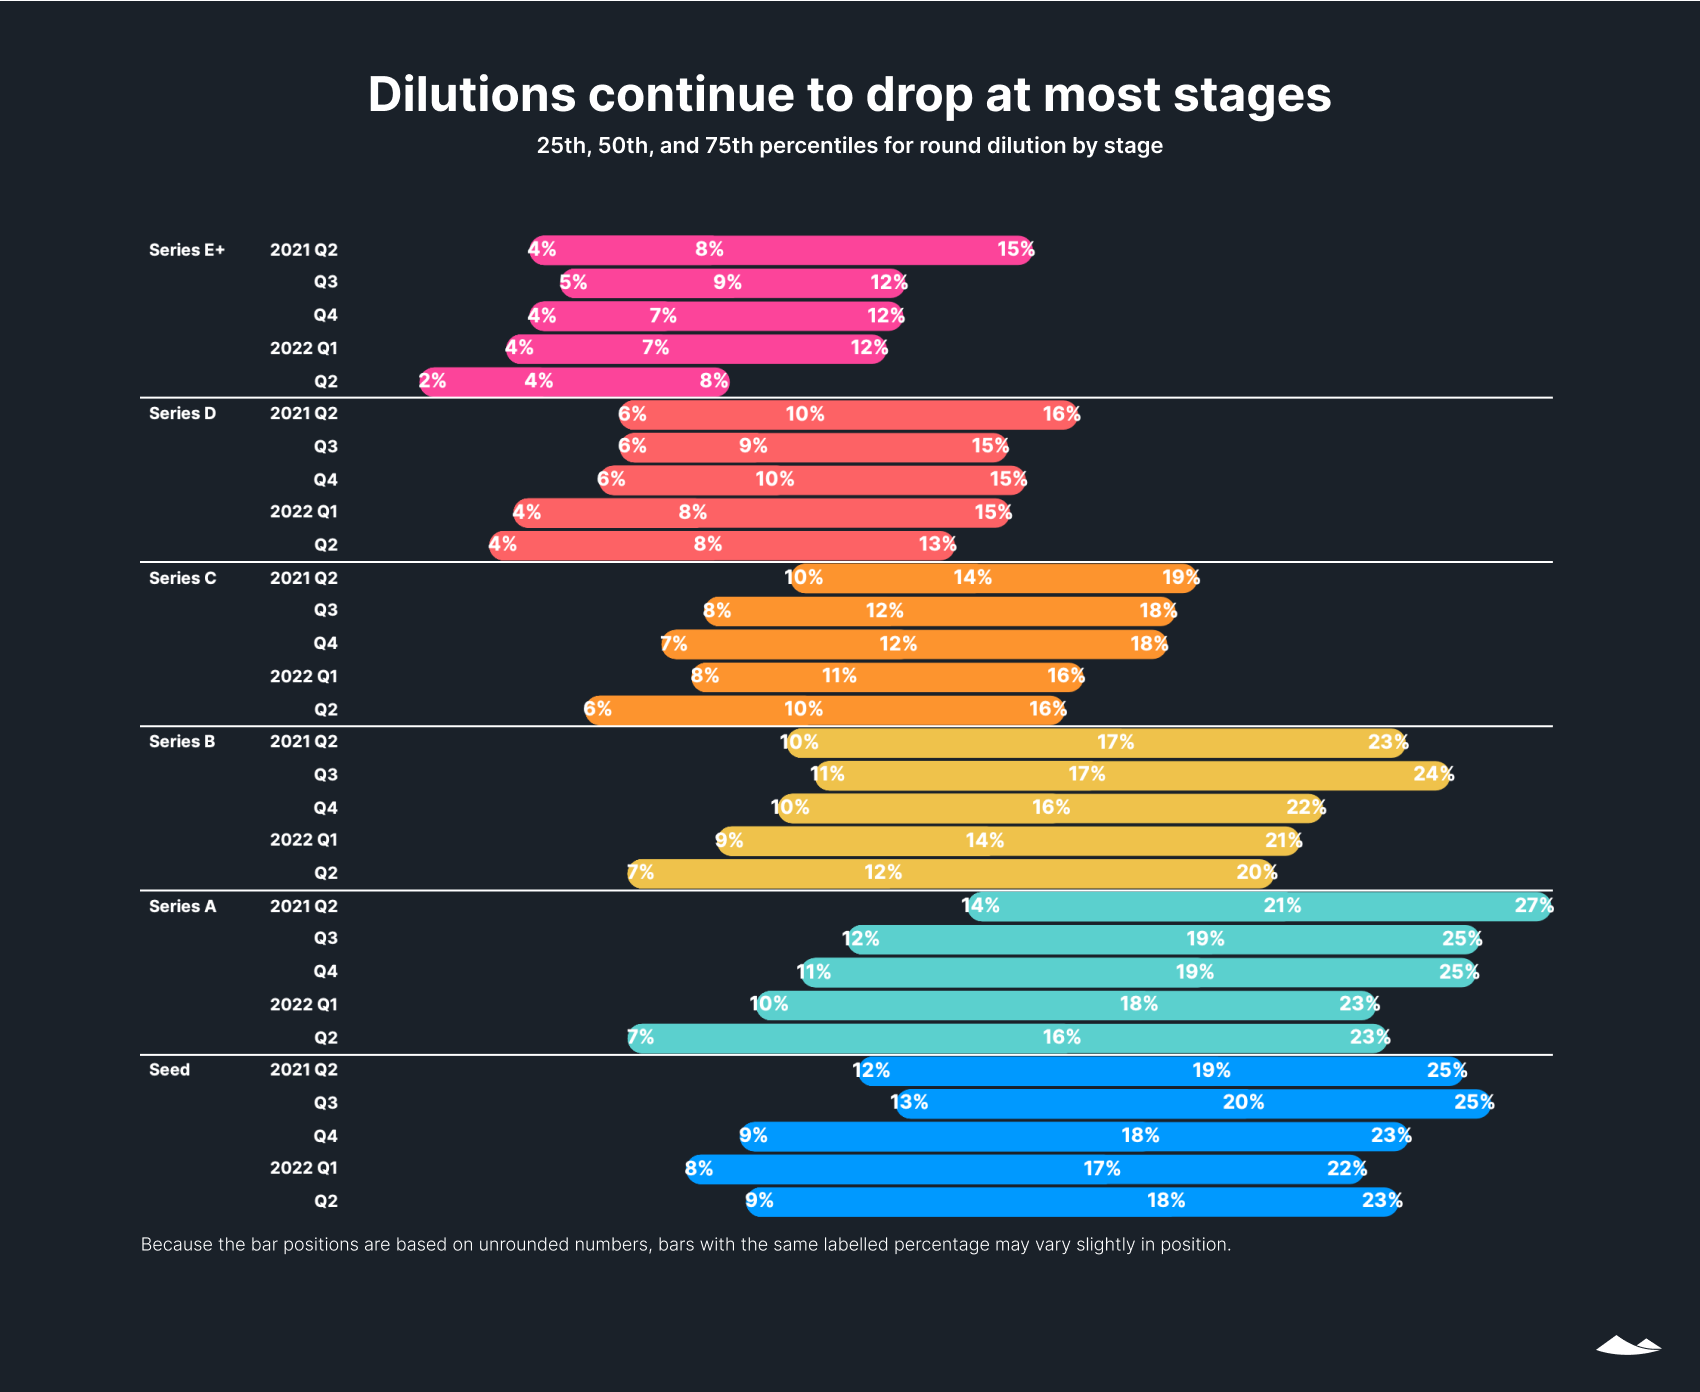 Dilutions continue to drop at most stages: 25th, 50th, and 75th percentiles for round dilution by stage. Sliding bar chart